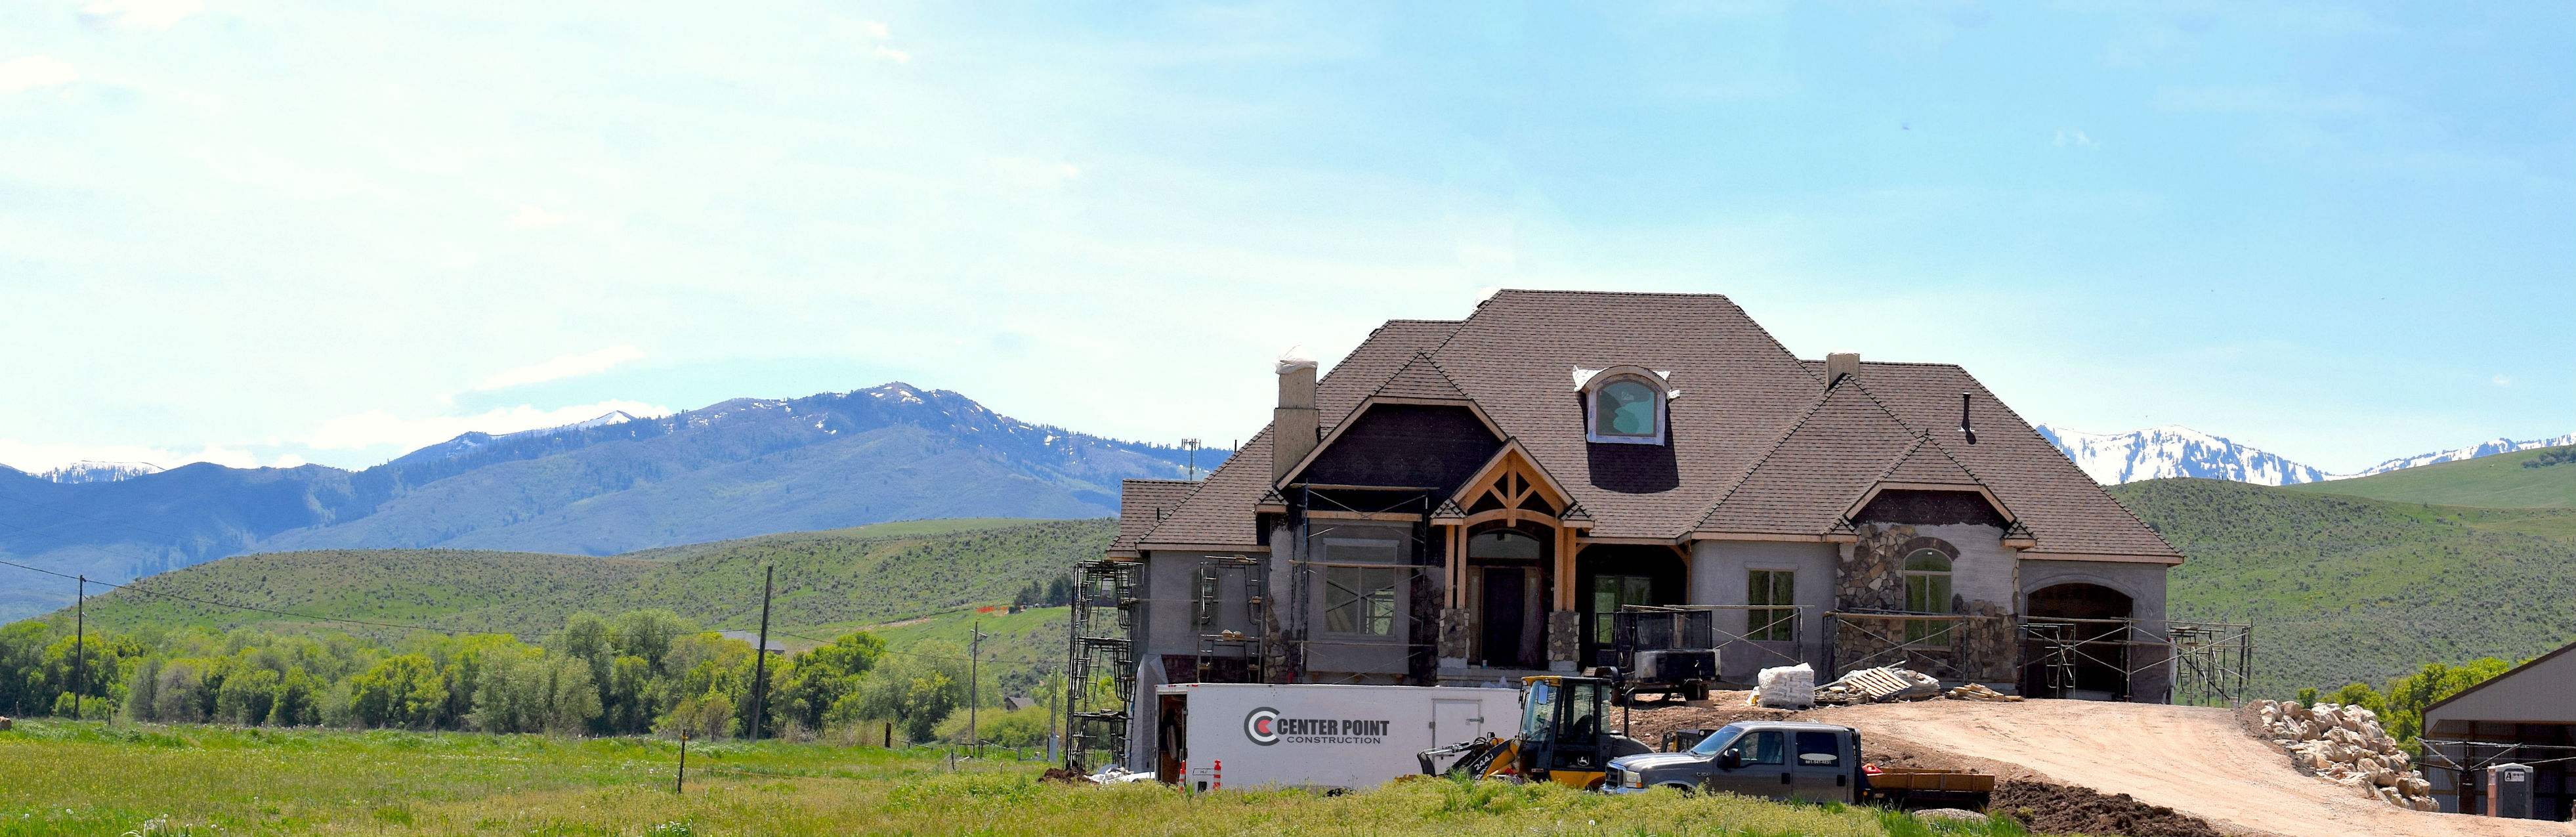 custom home being built by Center Point Construction in Morgan, Utah